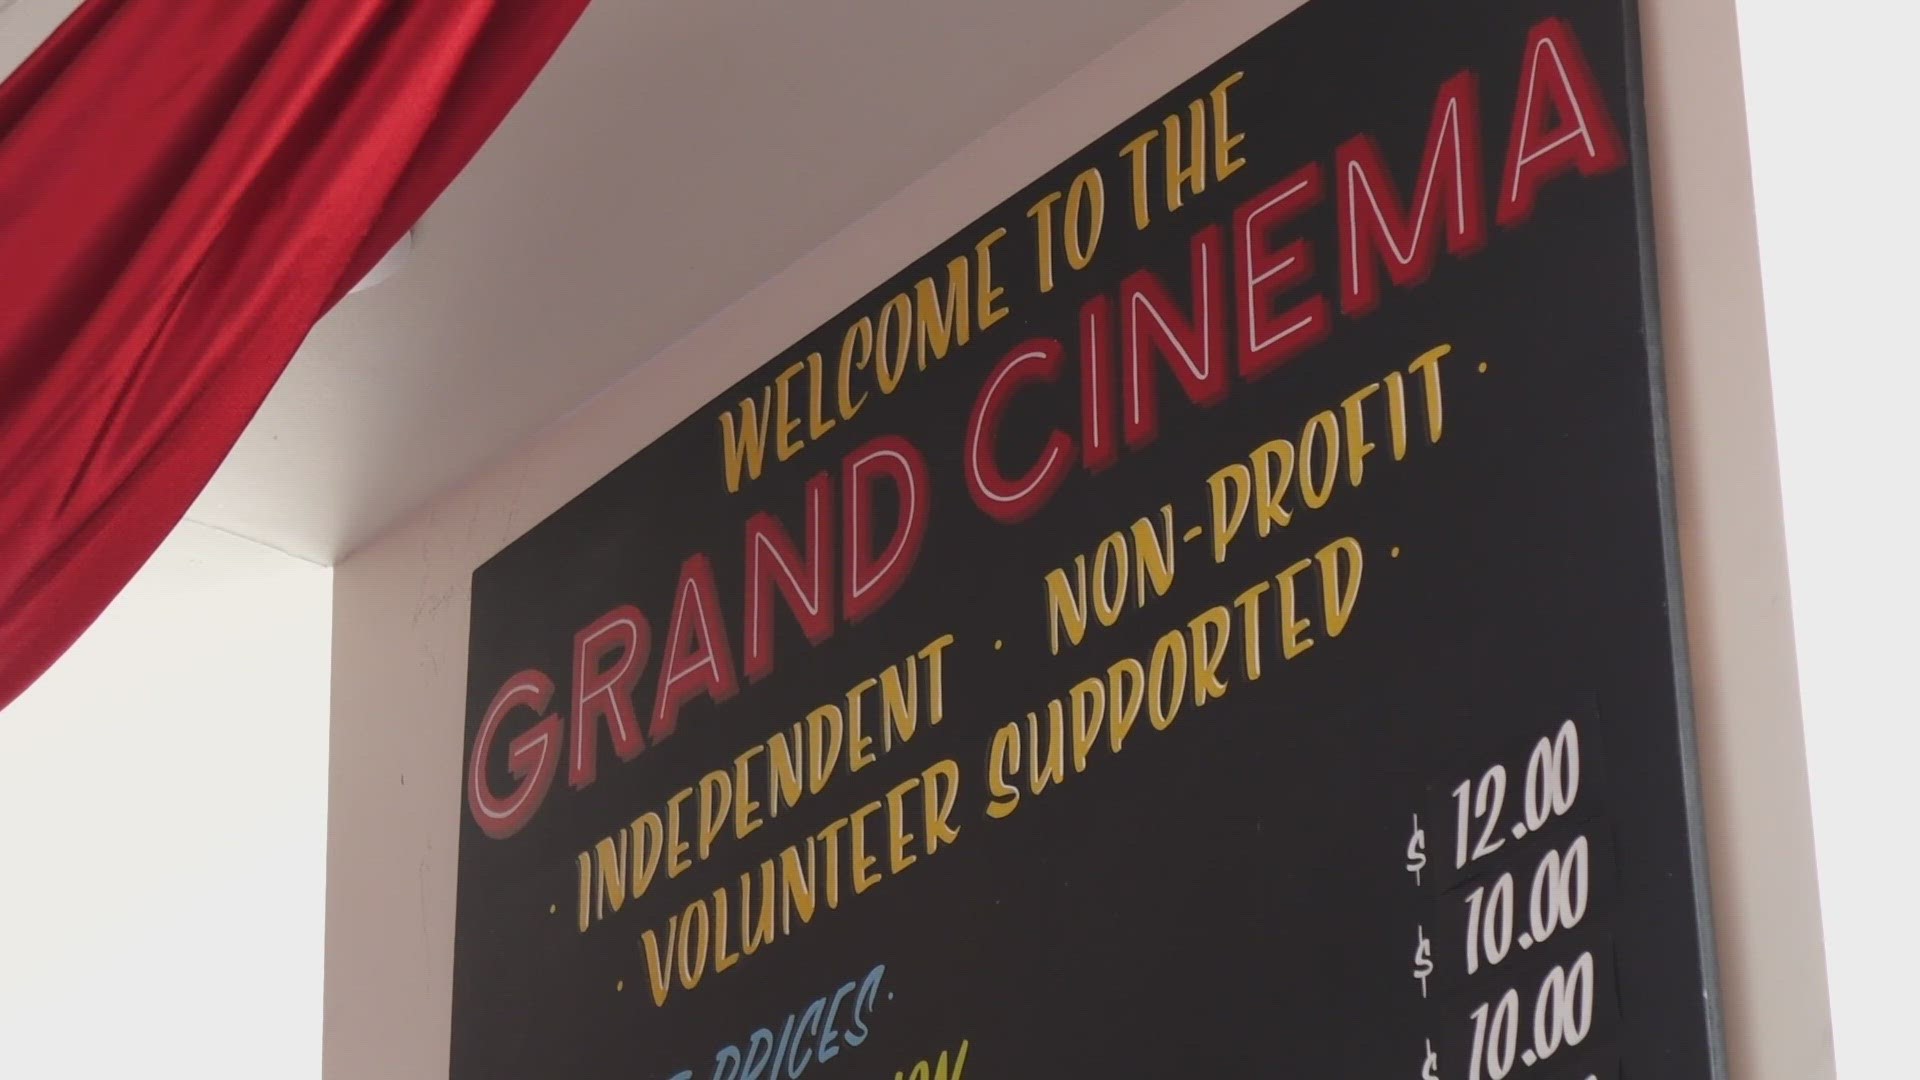 The Grand Cinema is Pierce County's only nonprofit center for film and film education.